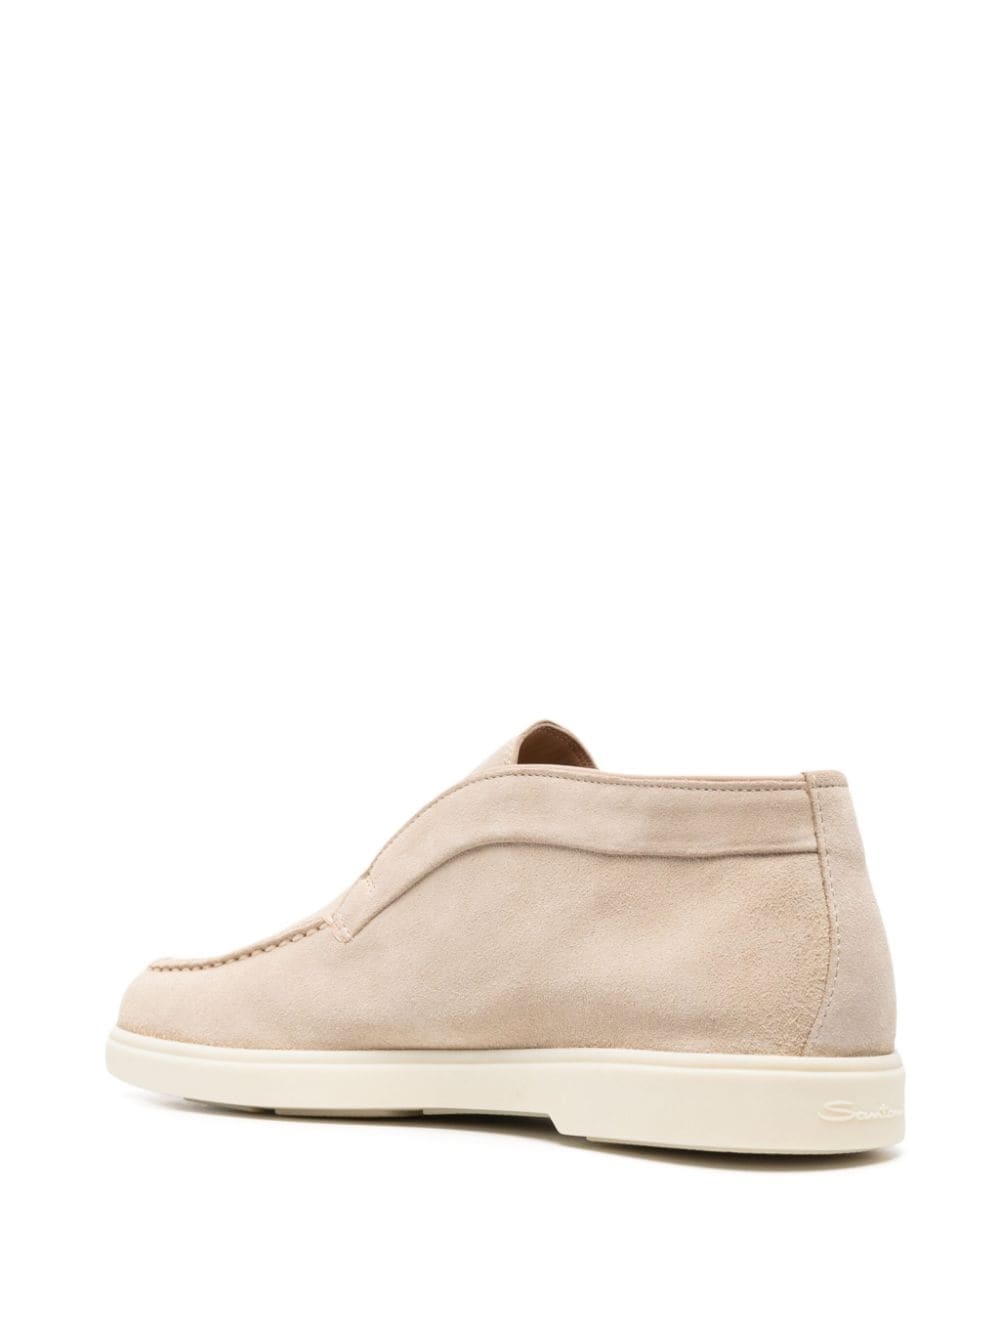 suede slip-on loafers - 3